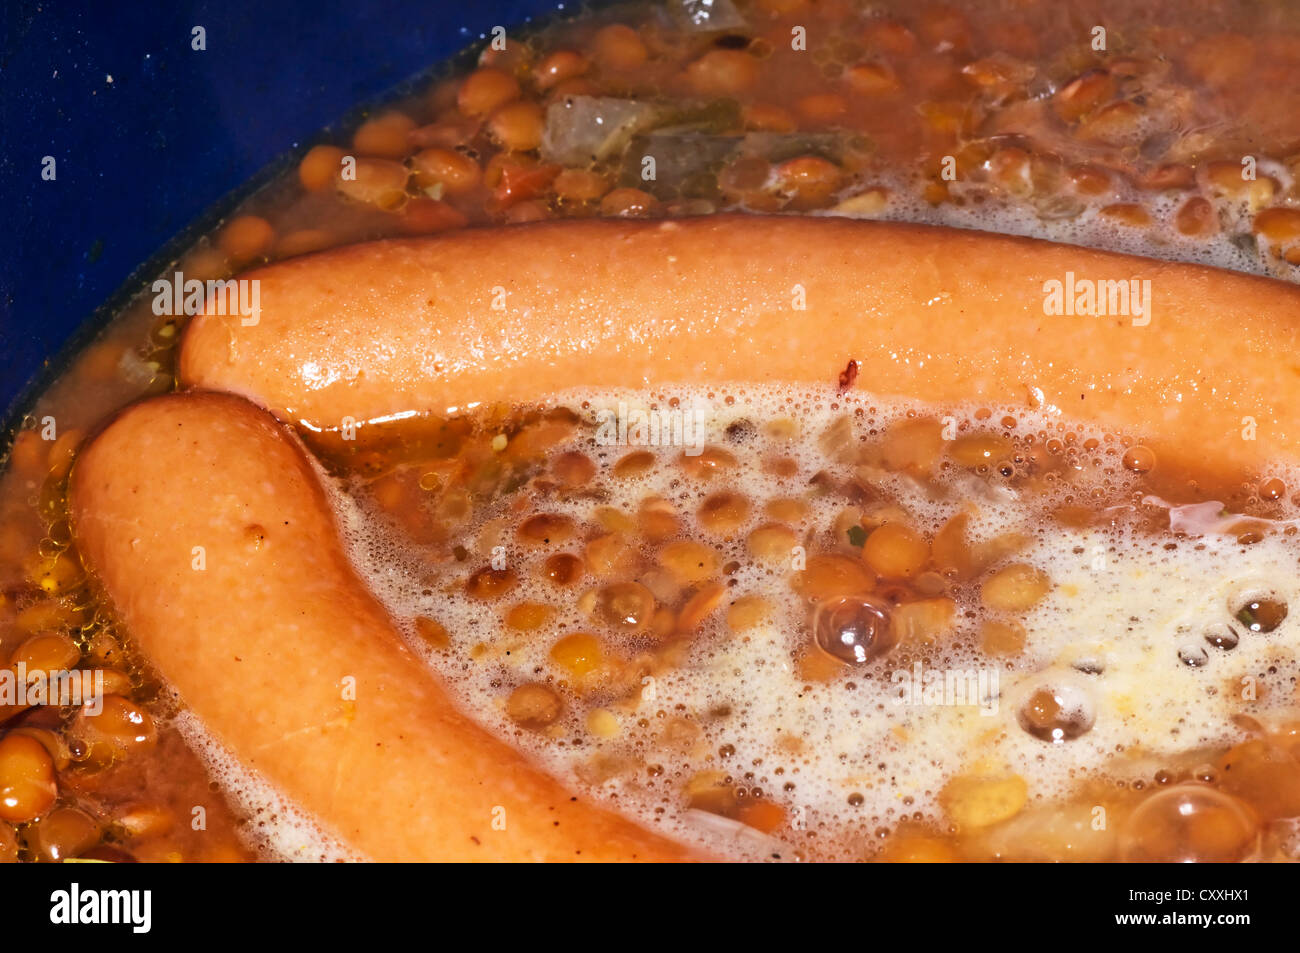 Swabian delicacy lentils and sausage Stock Photo